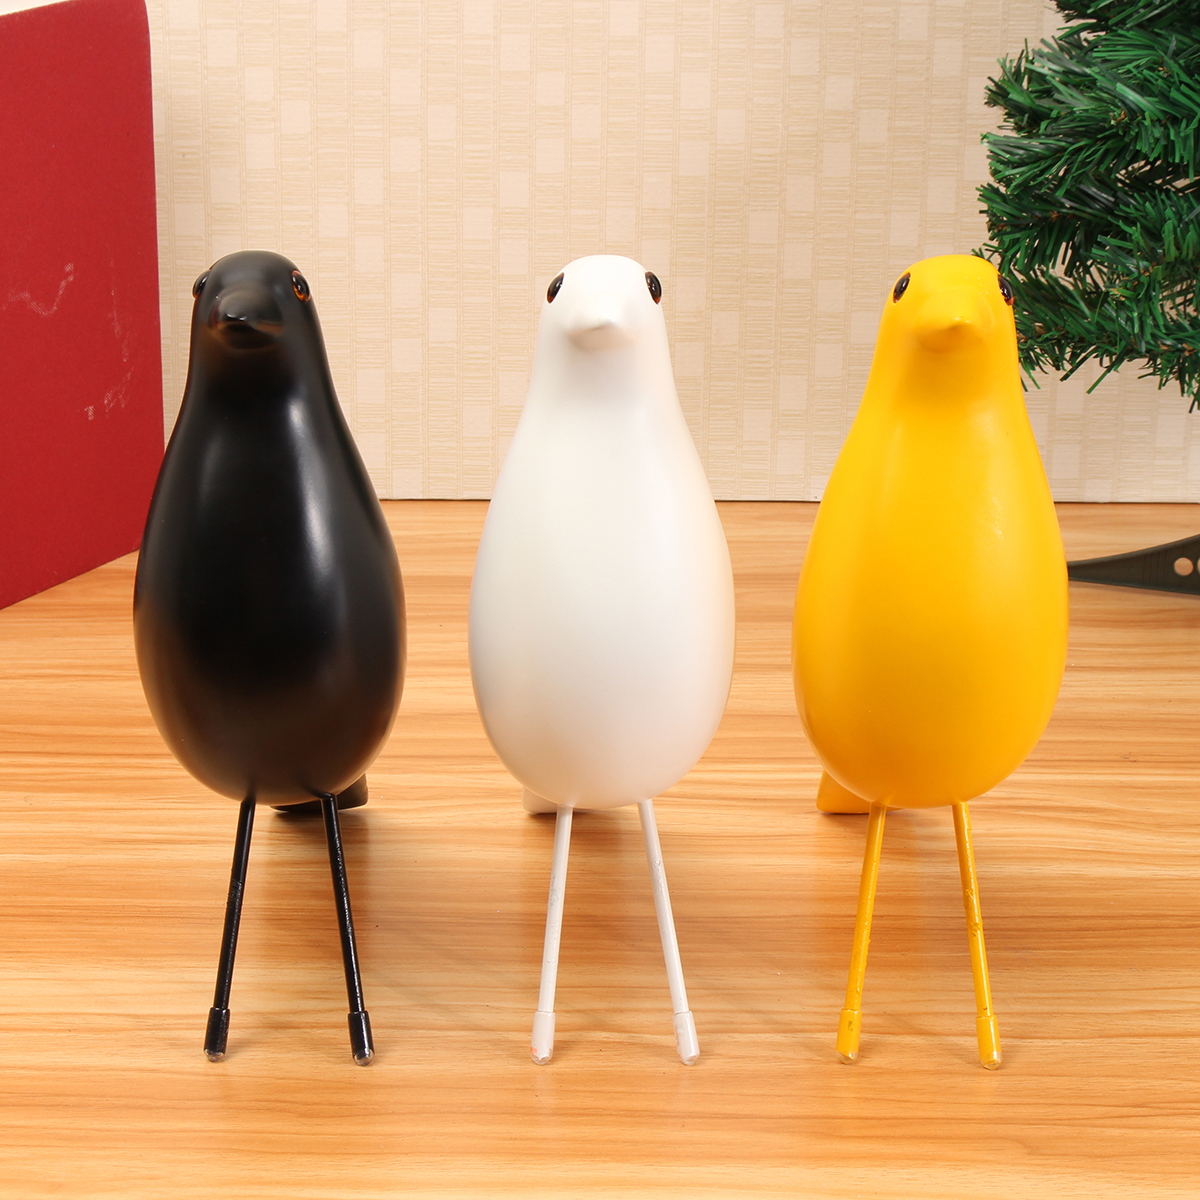 11'' Bird Desk Ornament House Resin Pigeon Gift Office Home Window Table Decorations